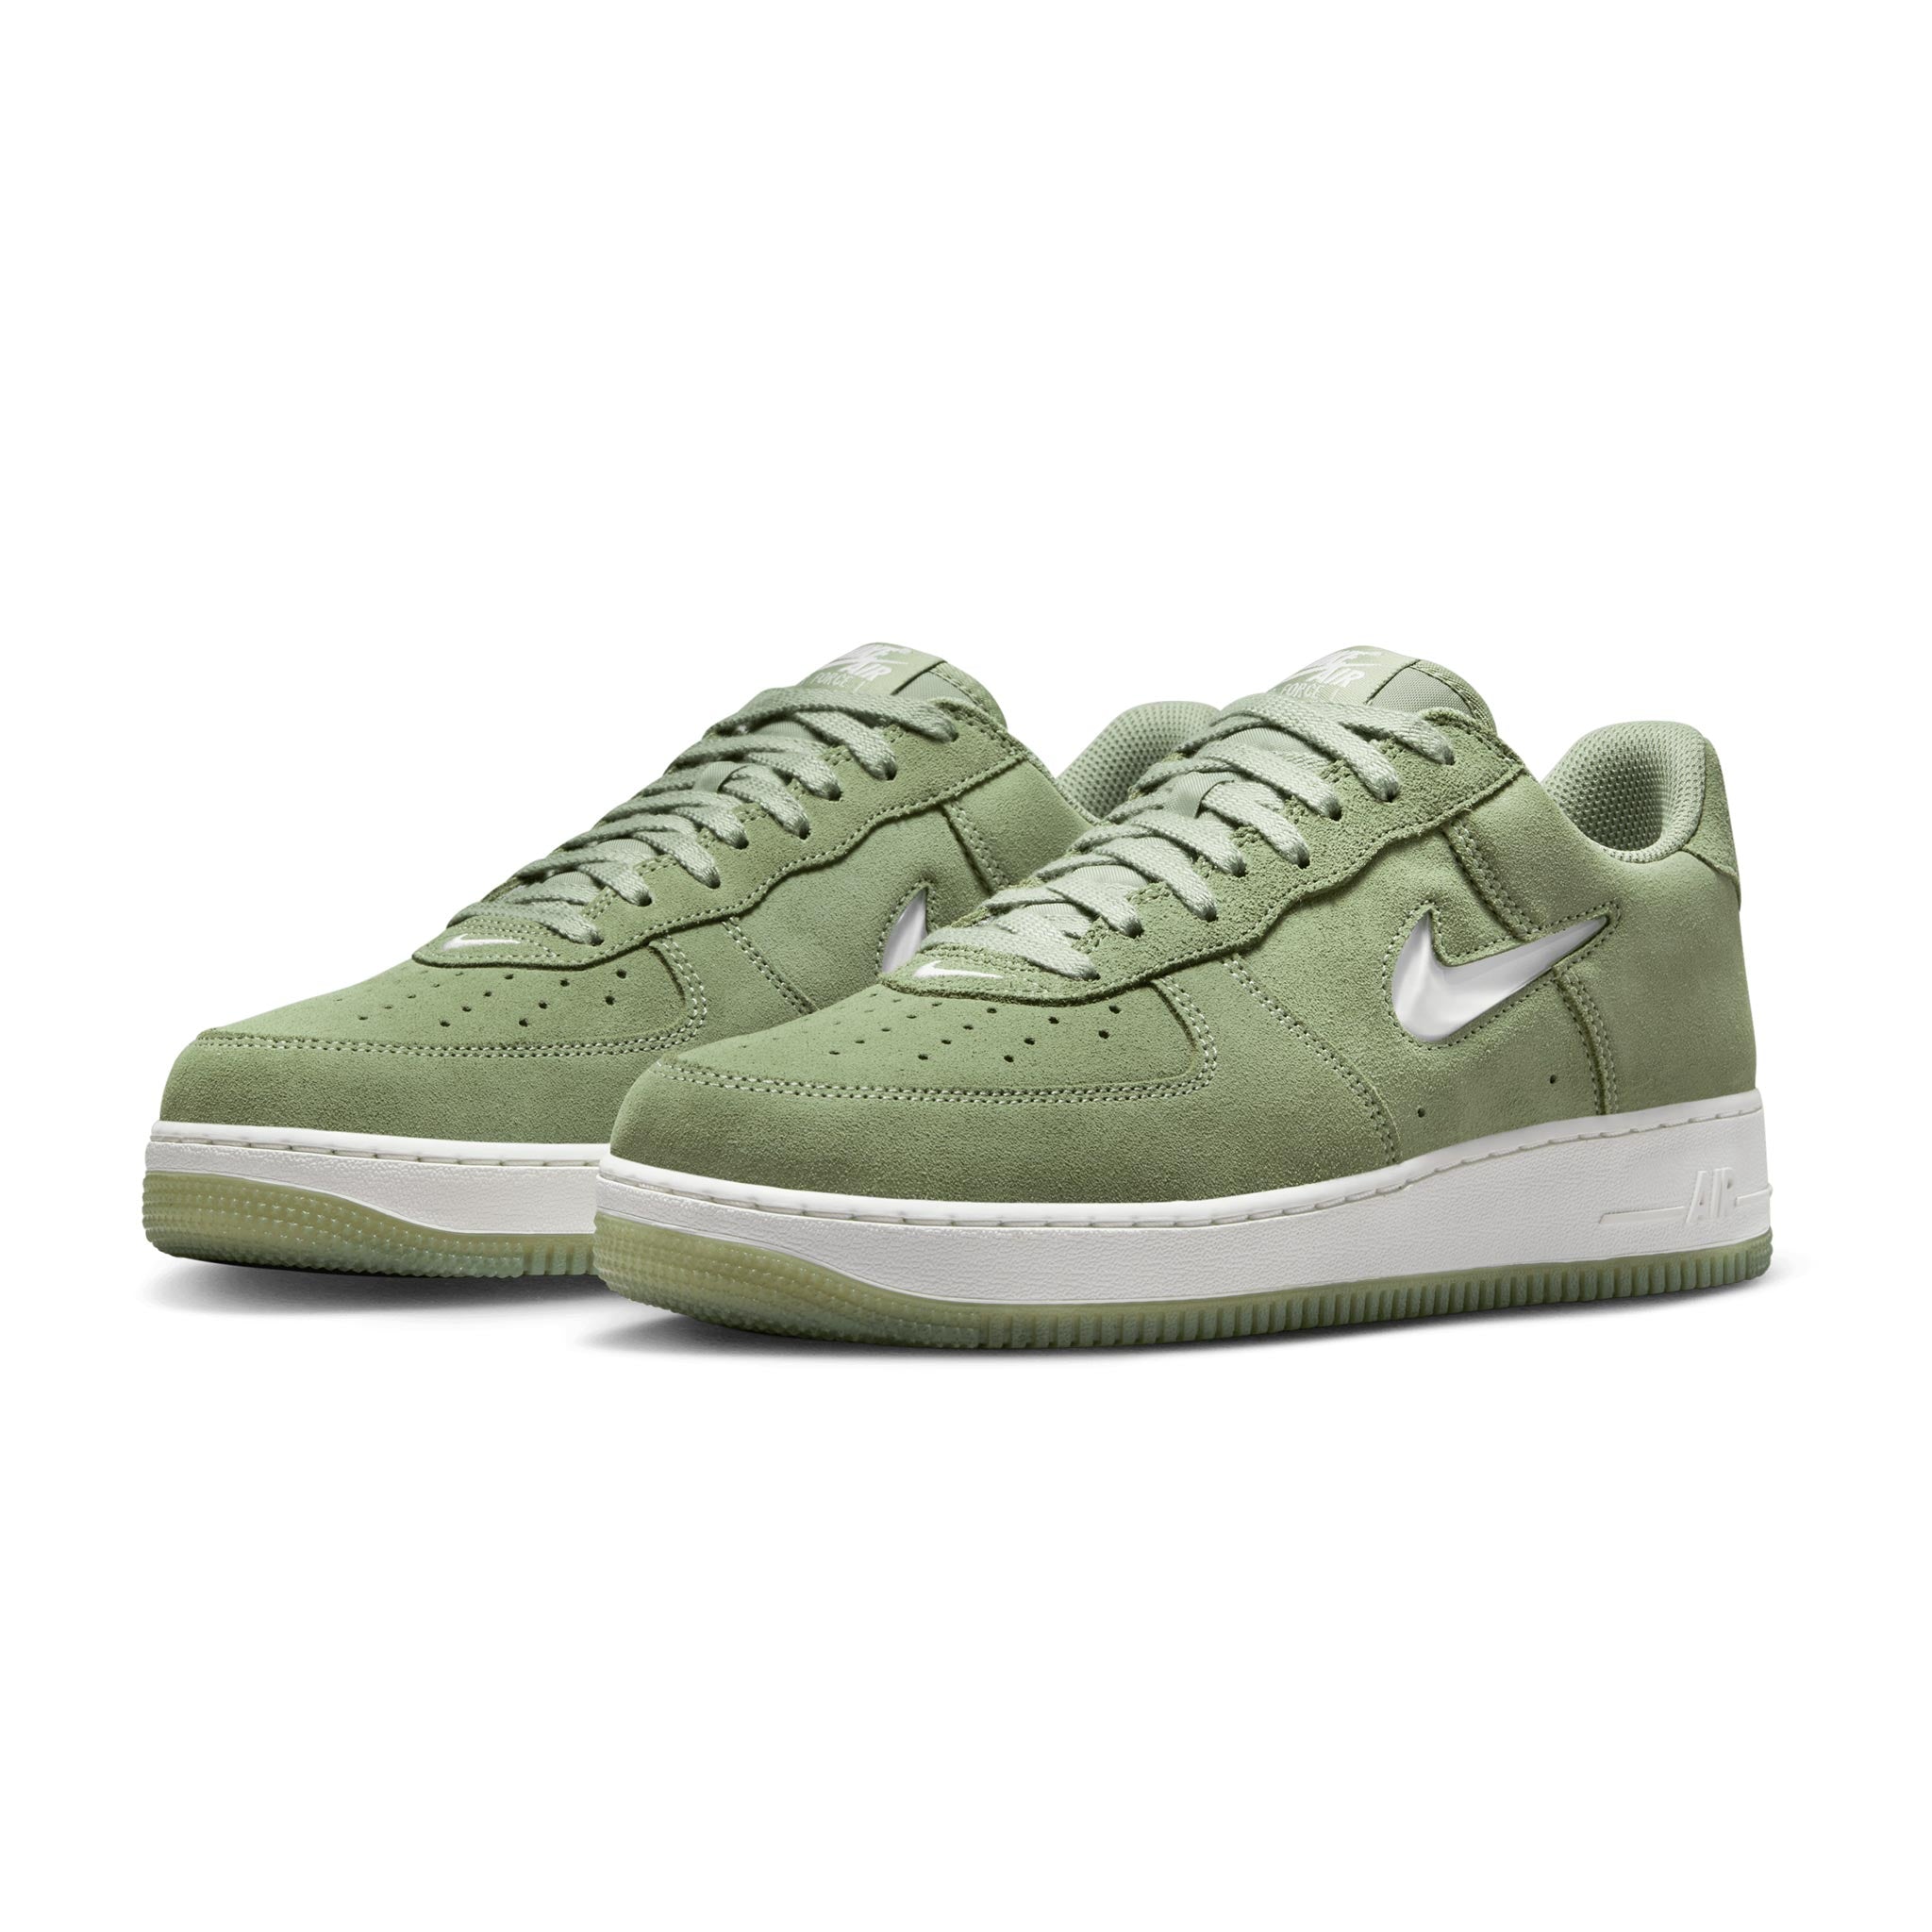 2009 nike dunk low light green beans and tomatoes